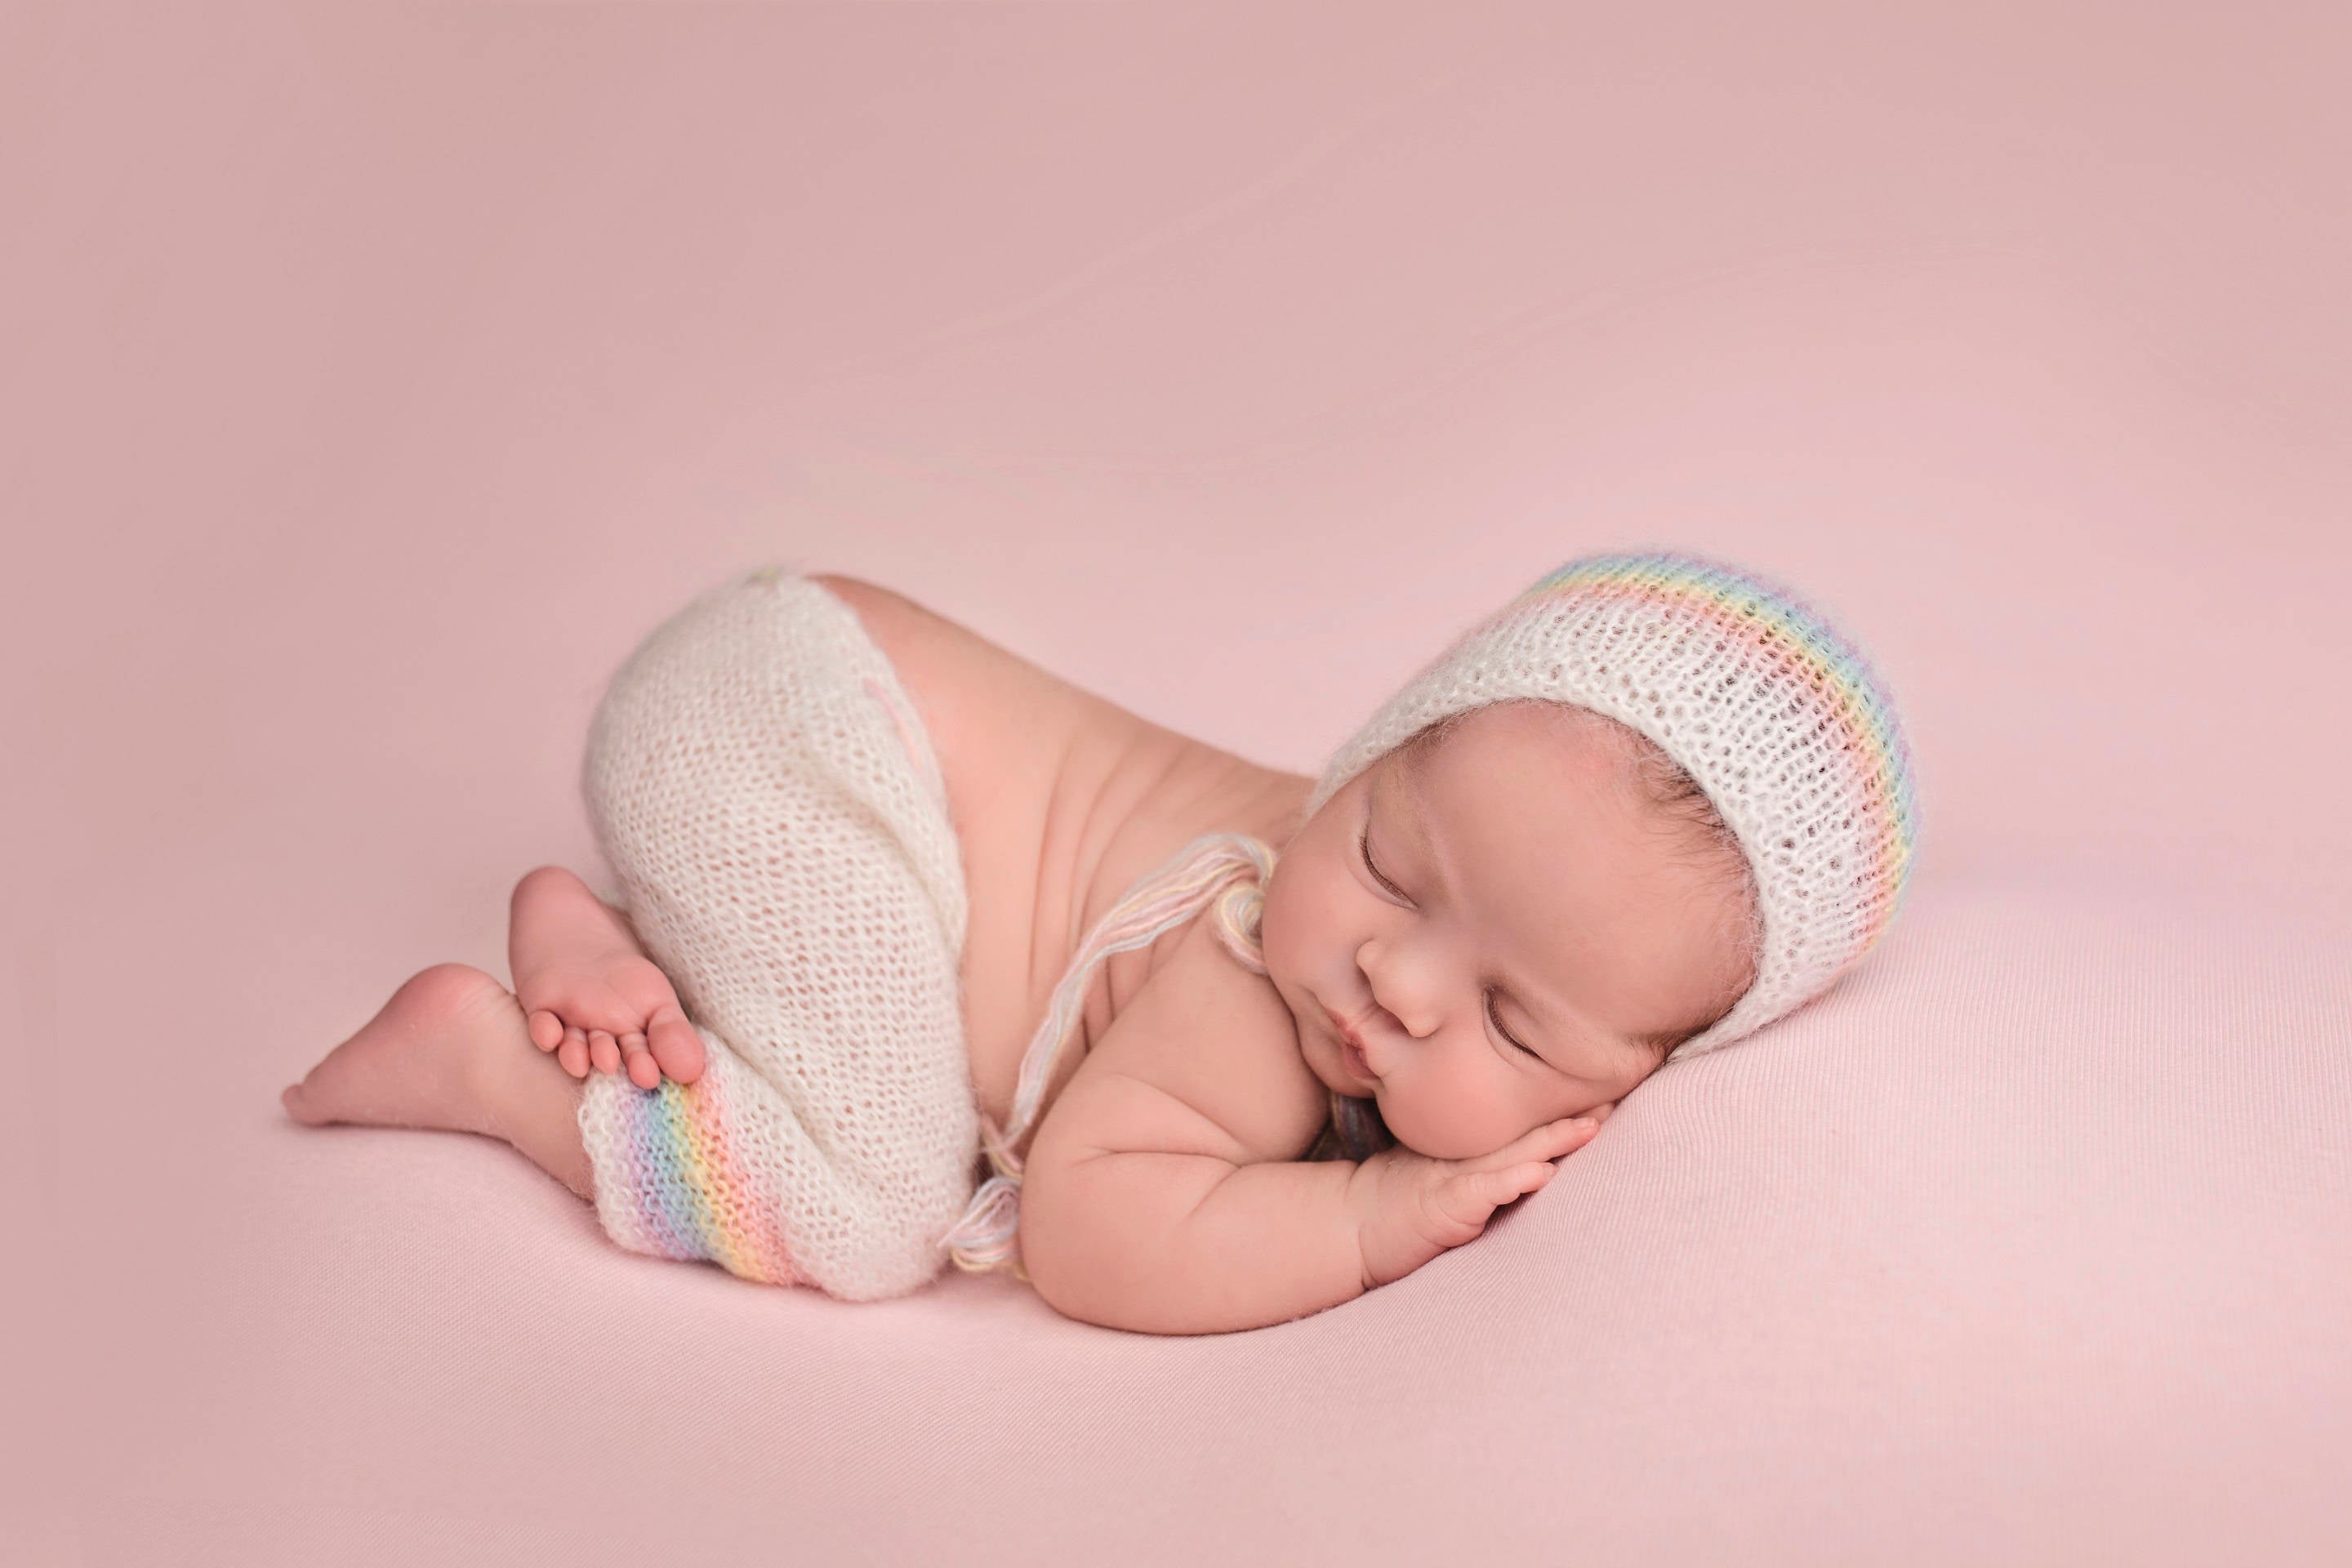 Rainbow Baby Knit Outfit